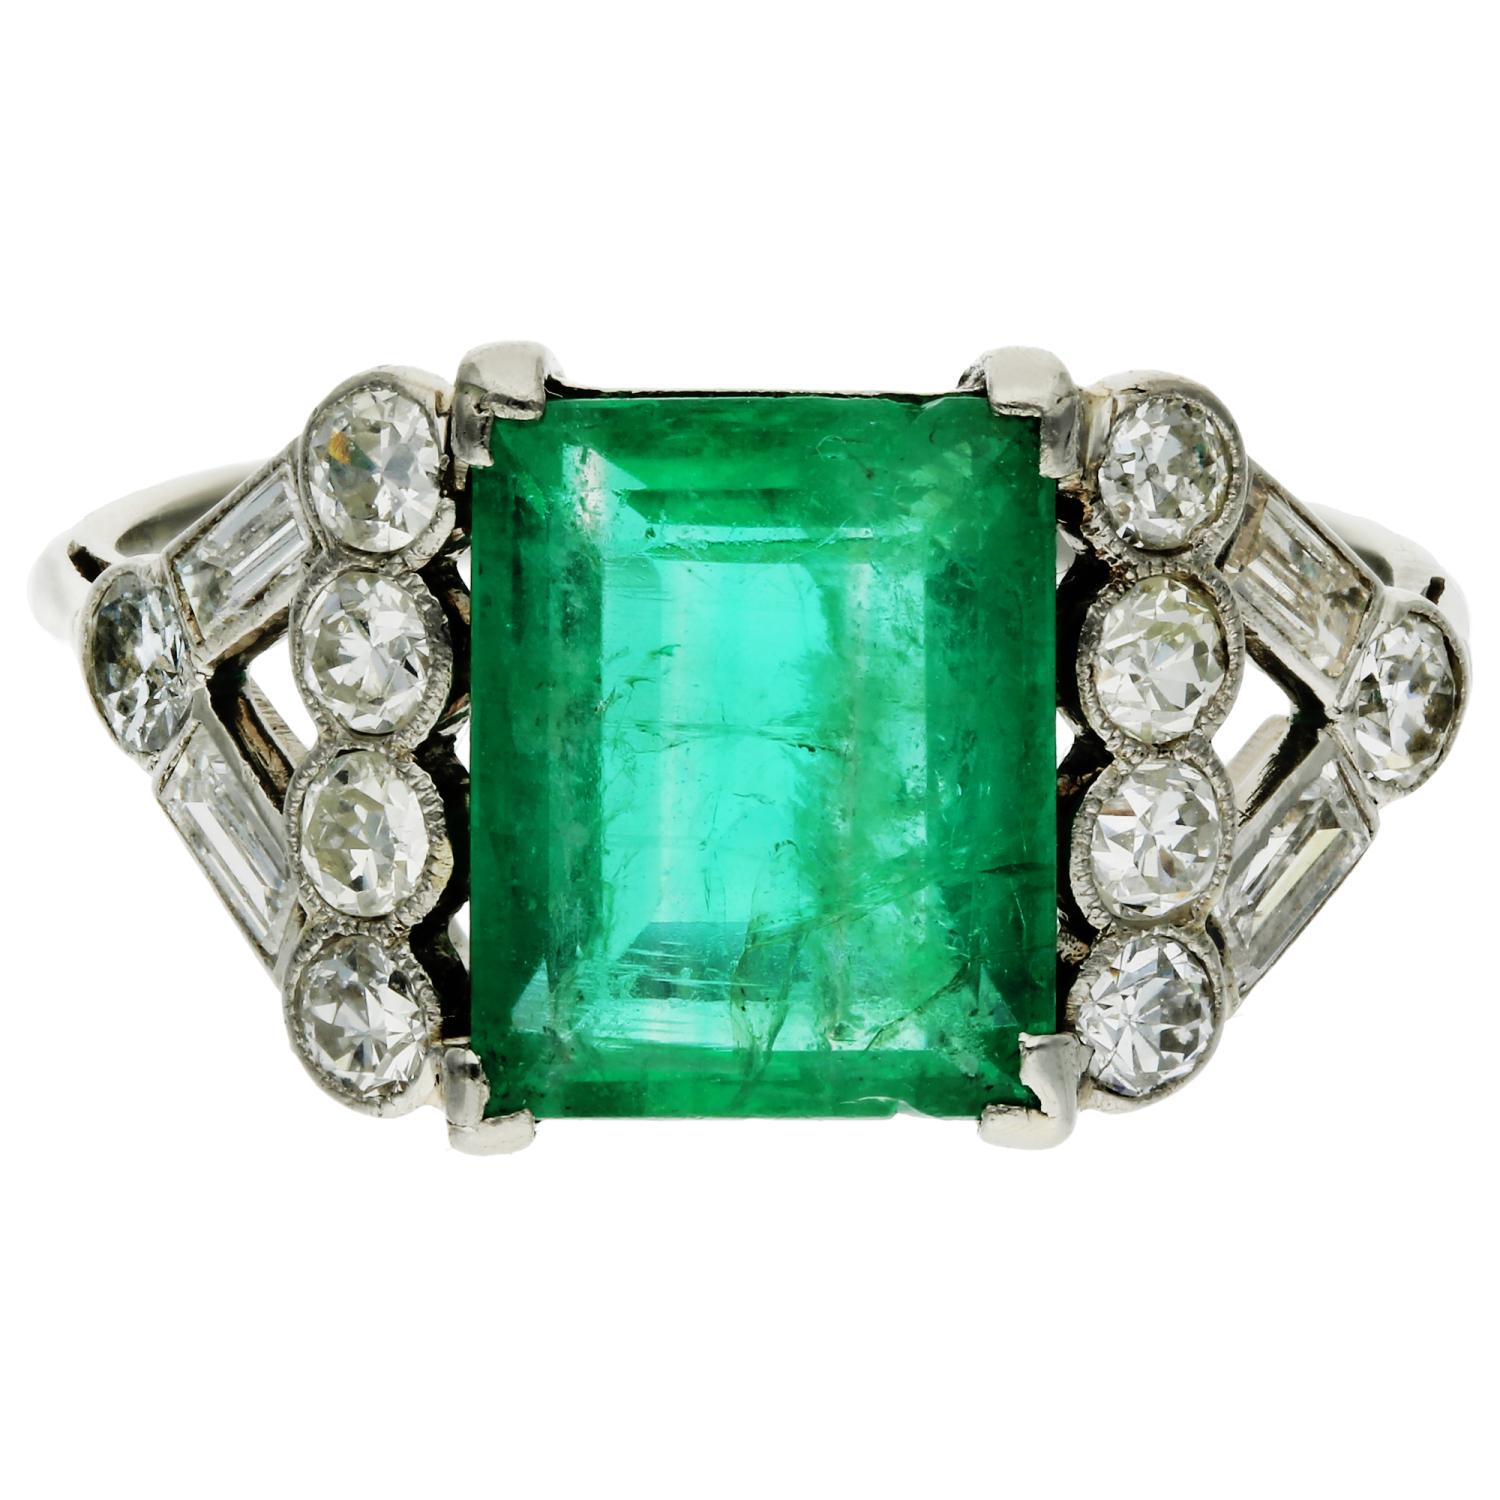 Platinum 2.65ct Emerald & 0.70ct Diamond Dress Ring

Indulge in sophistication with our Pre-loved Platinum Emerald & Diamond Ring, a captivating ensemble that effortlessly combines vintage charm with timeless elegance.

The ring features a